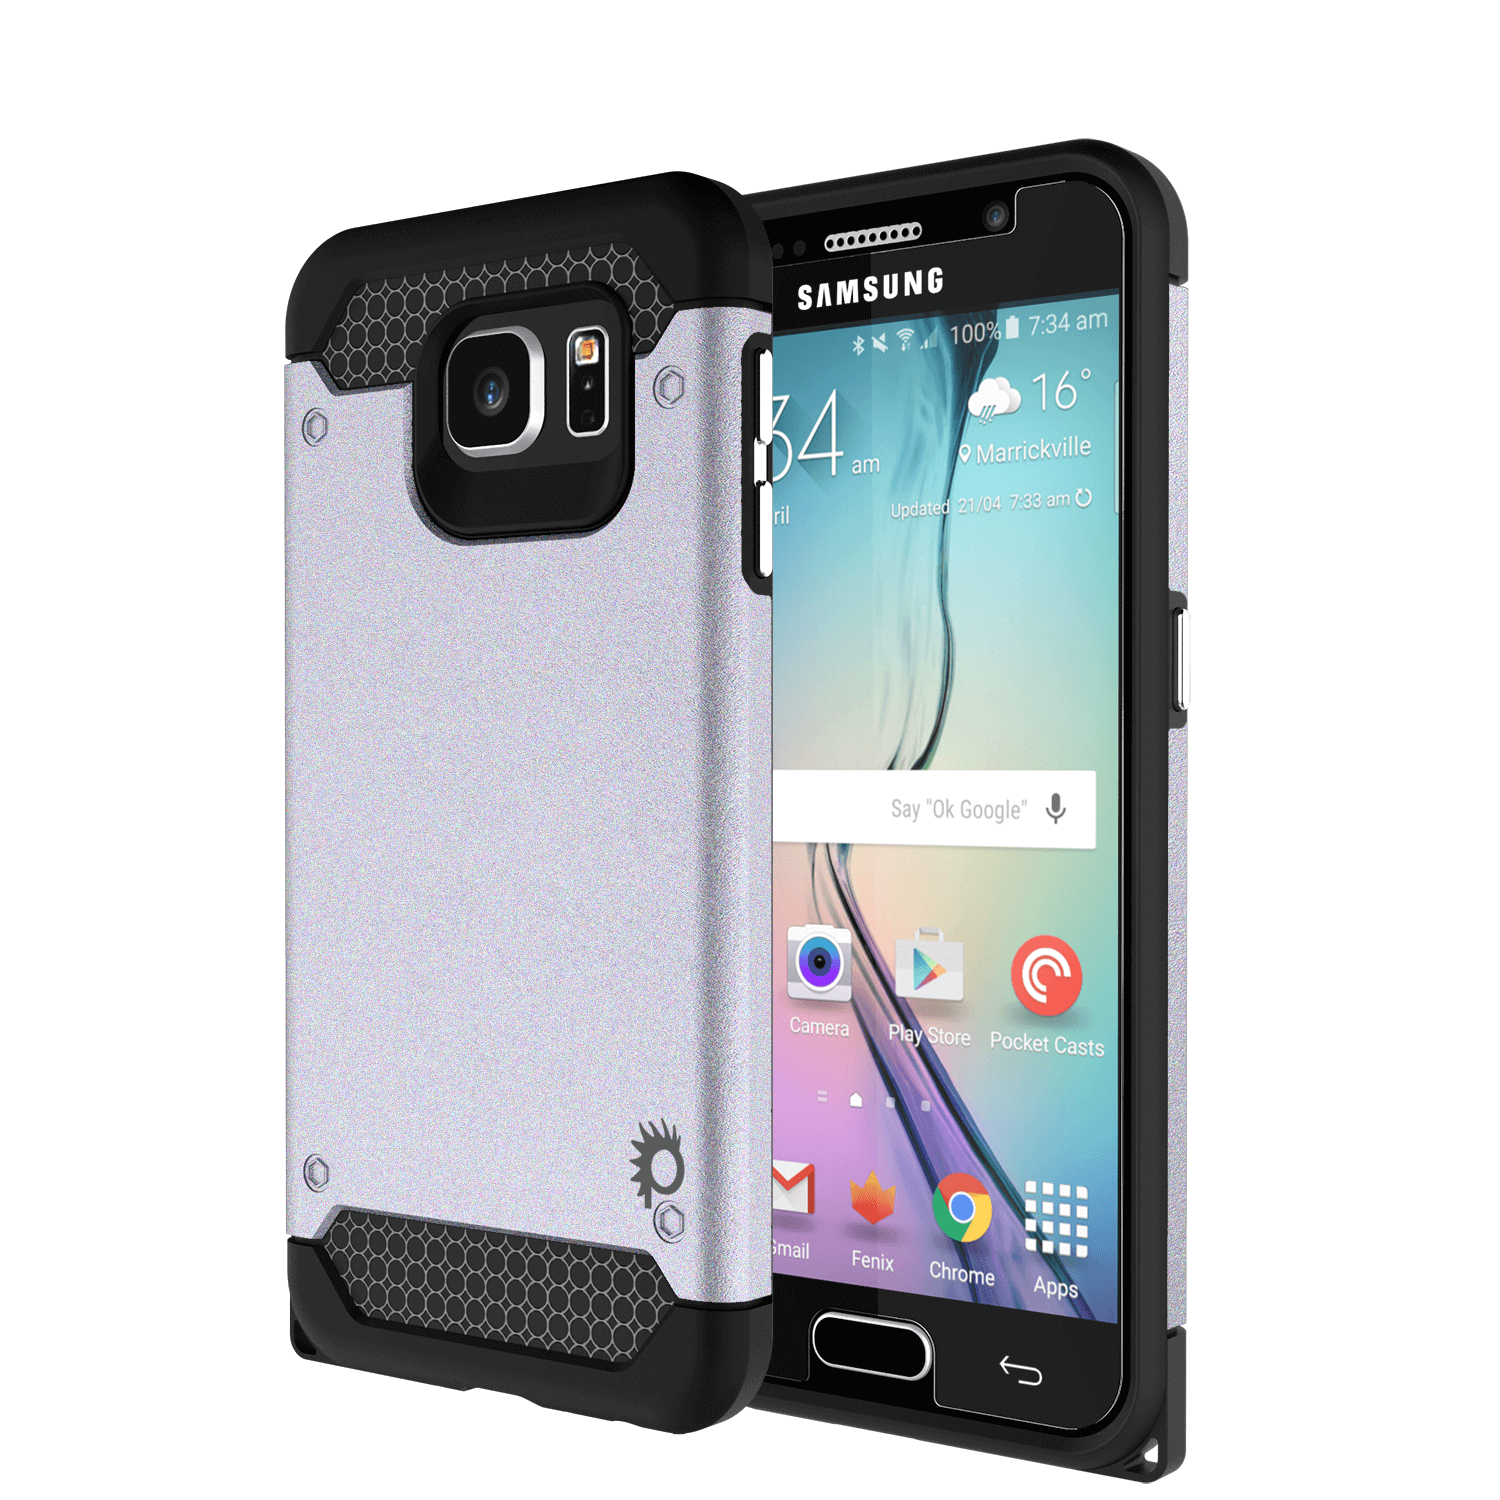 Galaxy S6 Case PunkCase Galactic Silver Slim Protective Armor Soft Cover Case w/ Tempered Glass